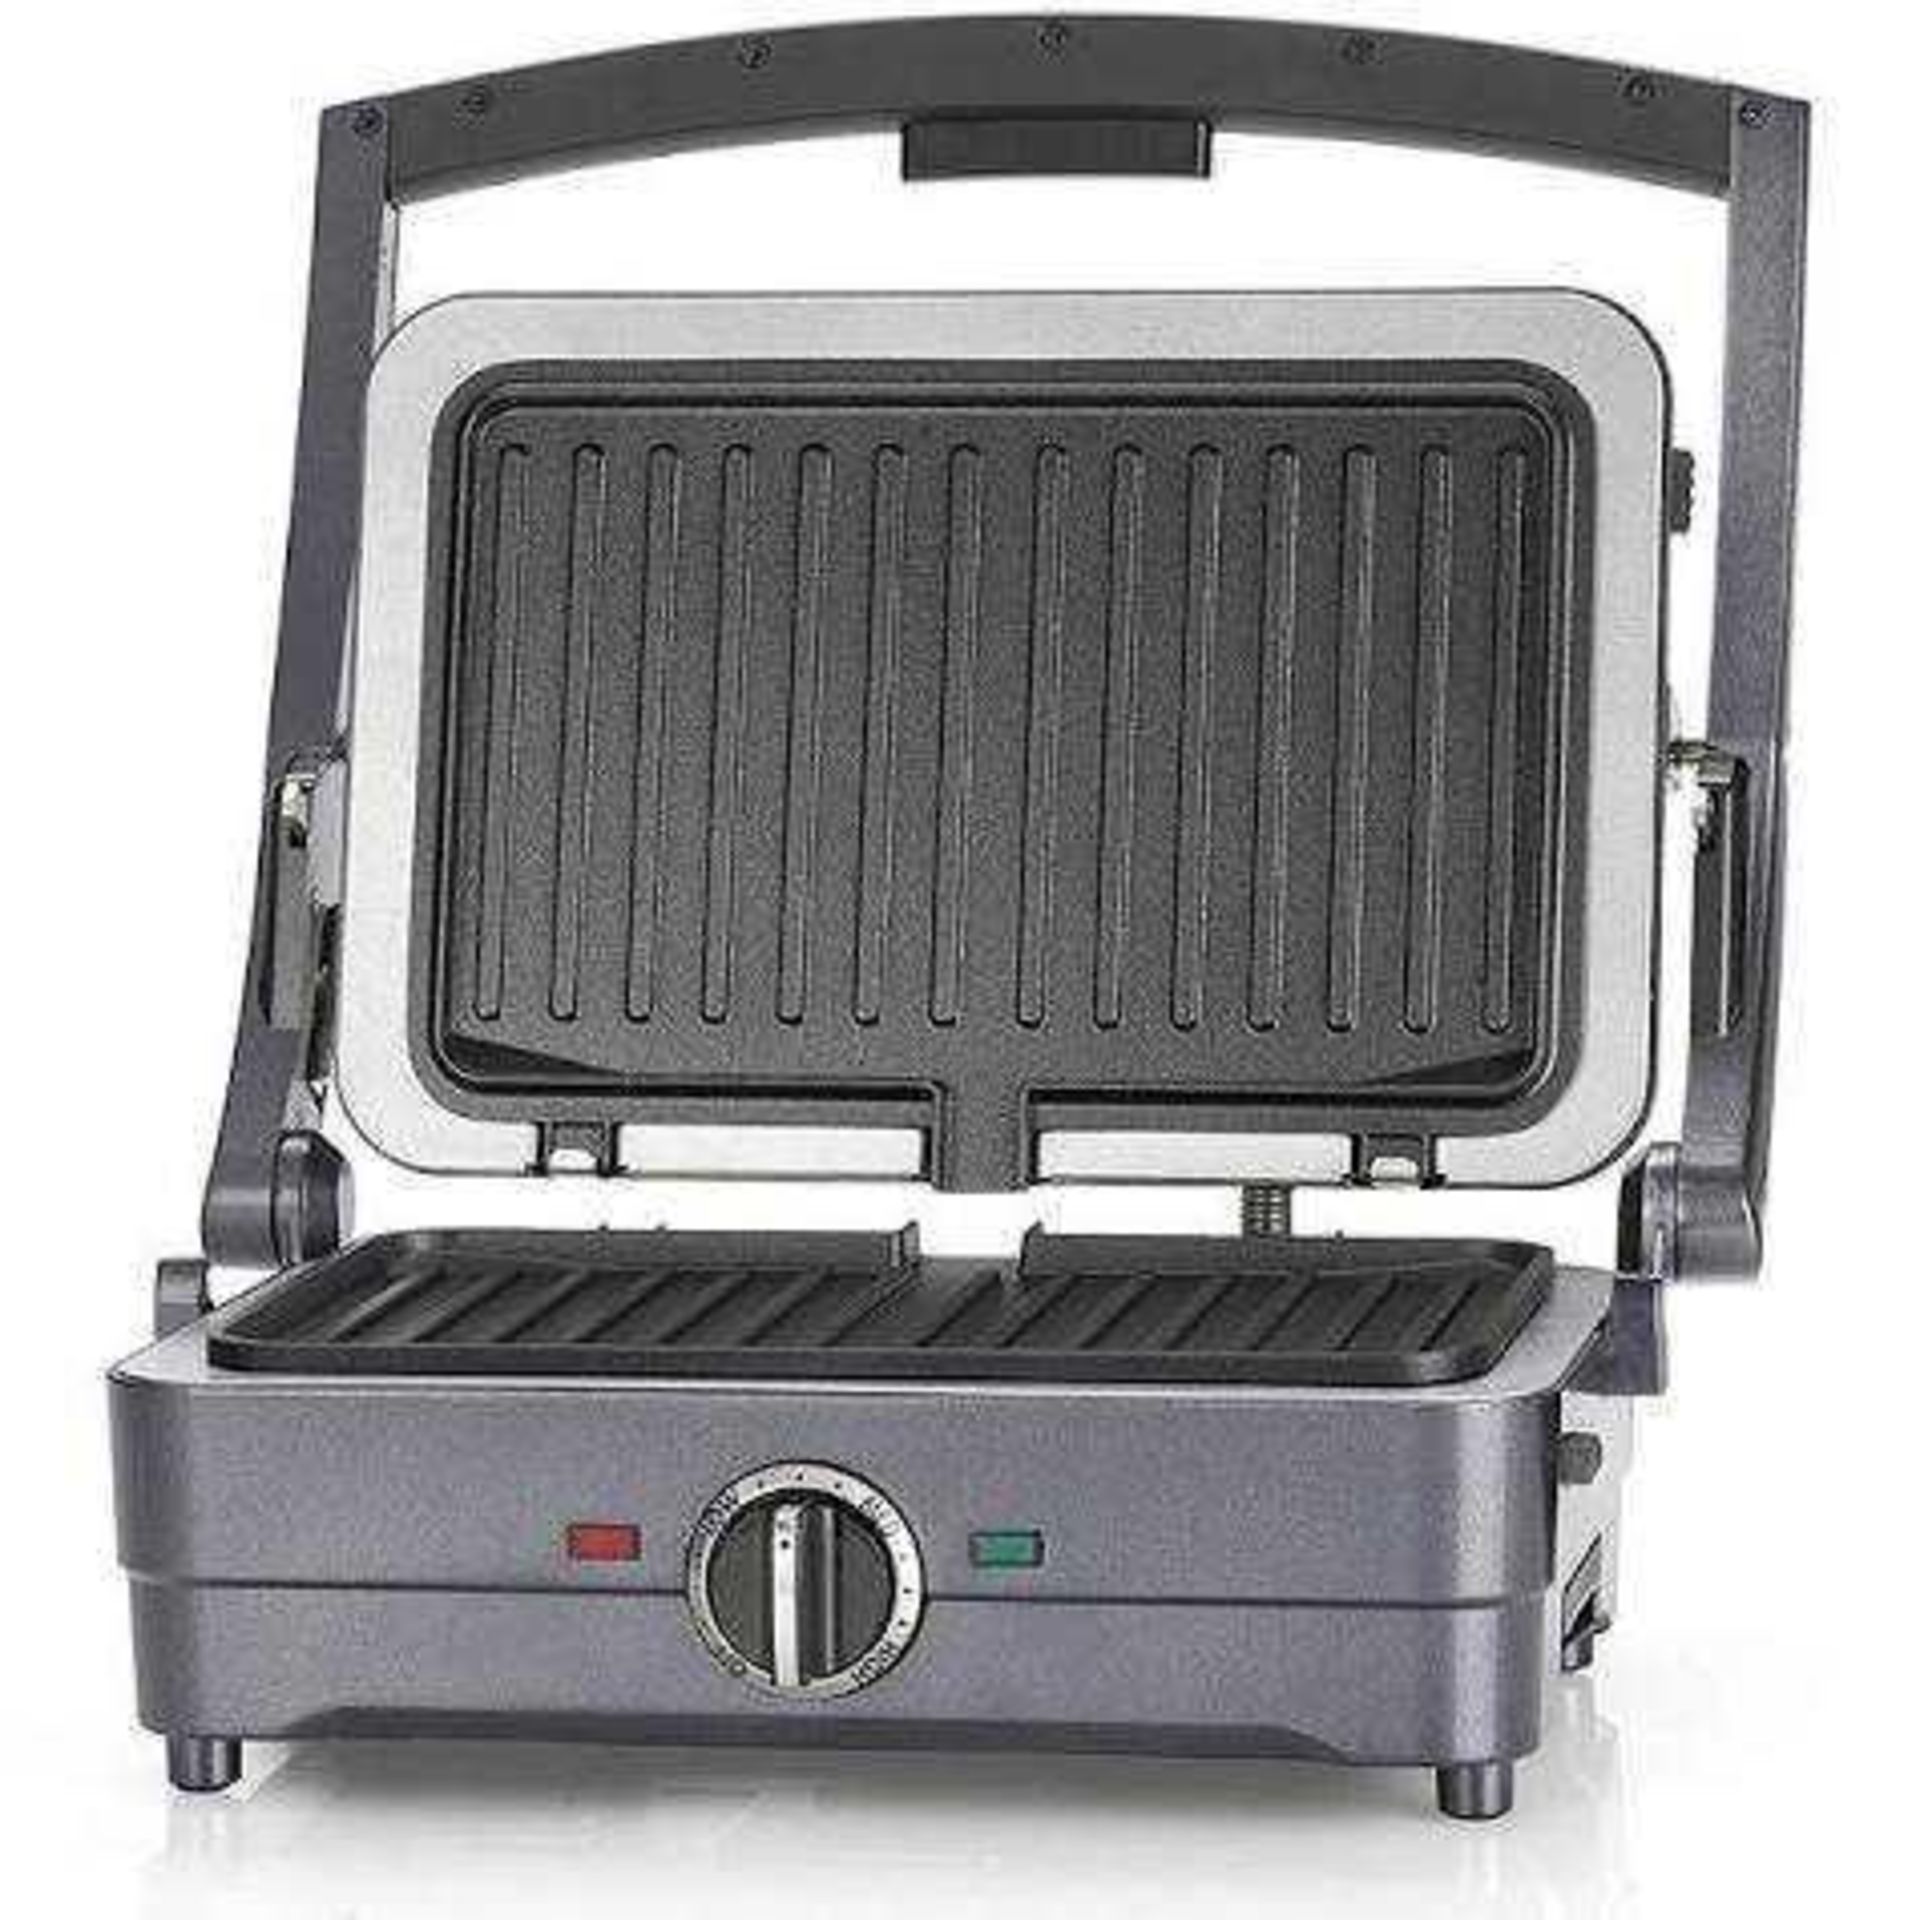 Tr) RRP £120 Lot To Contain 1X Cuisinart 2 In 1 Grill And Sandwich Maker (Needs Attention)